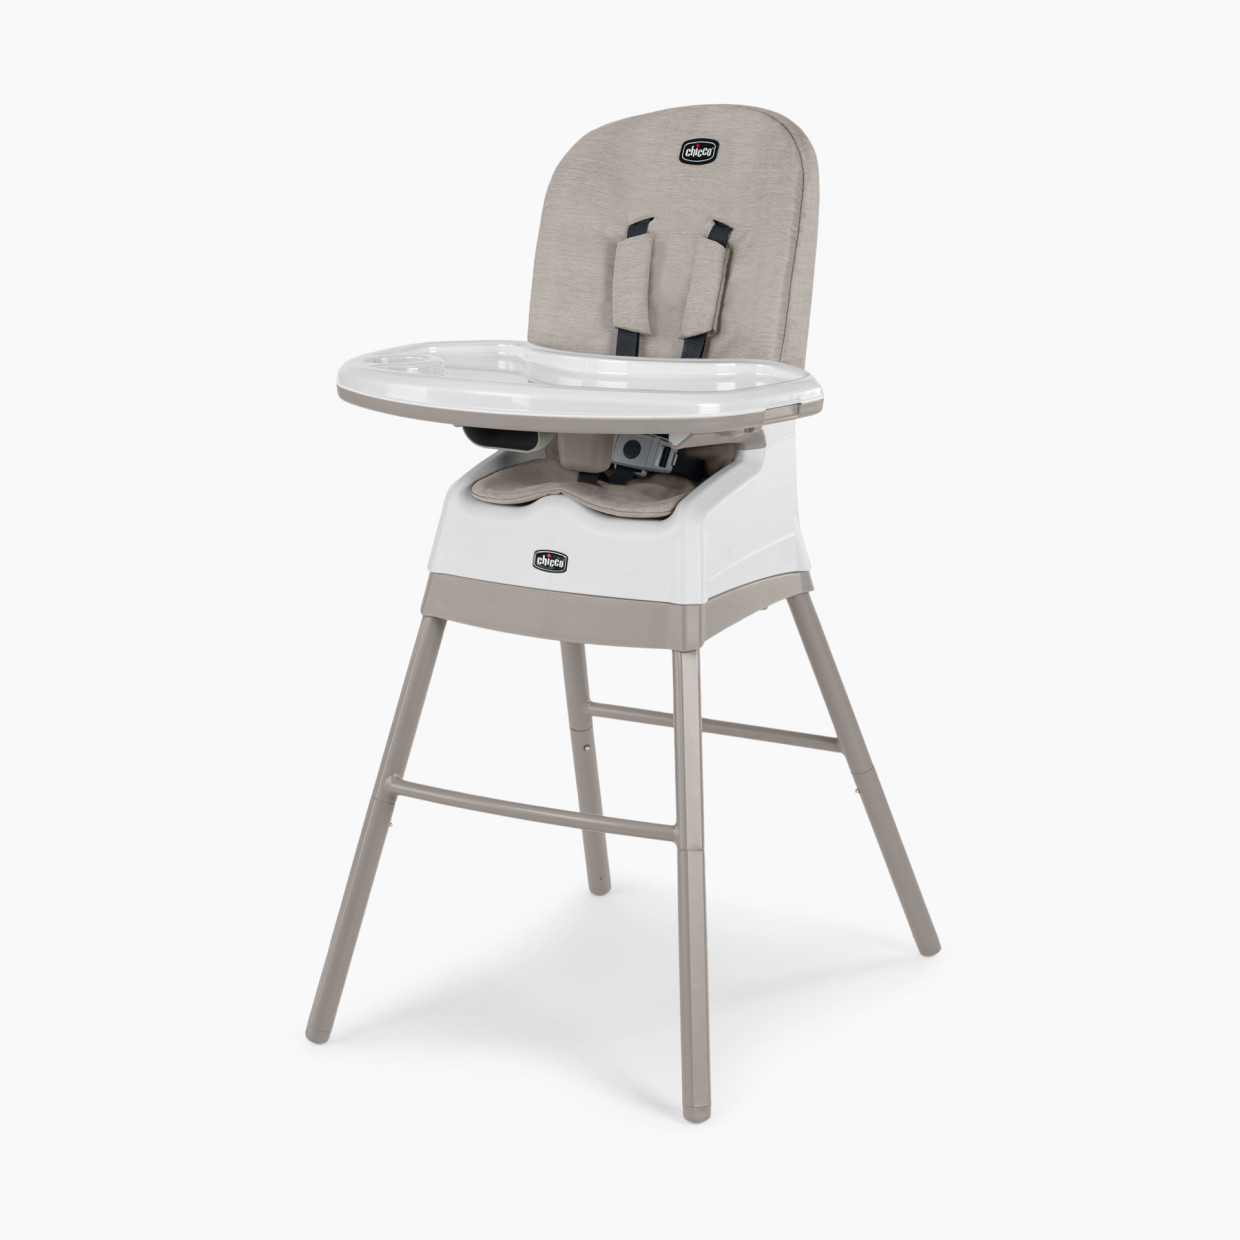 Chicco Stack Hi-Lo 6-in-1 Multi-Use High Chair - Sand.